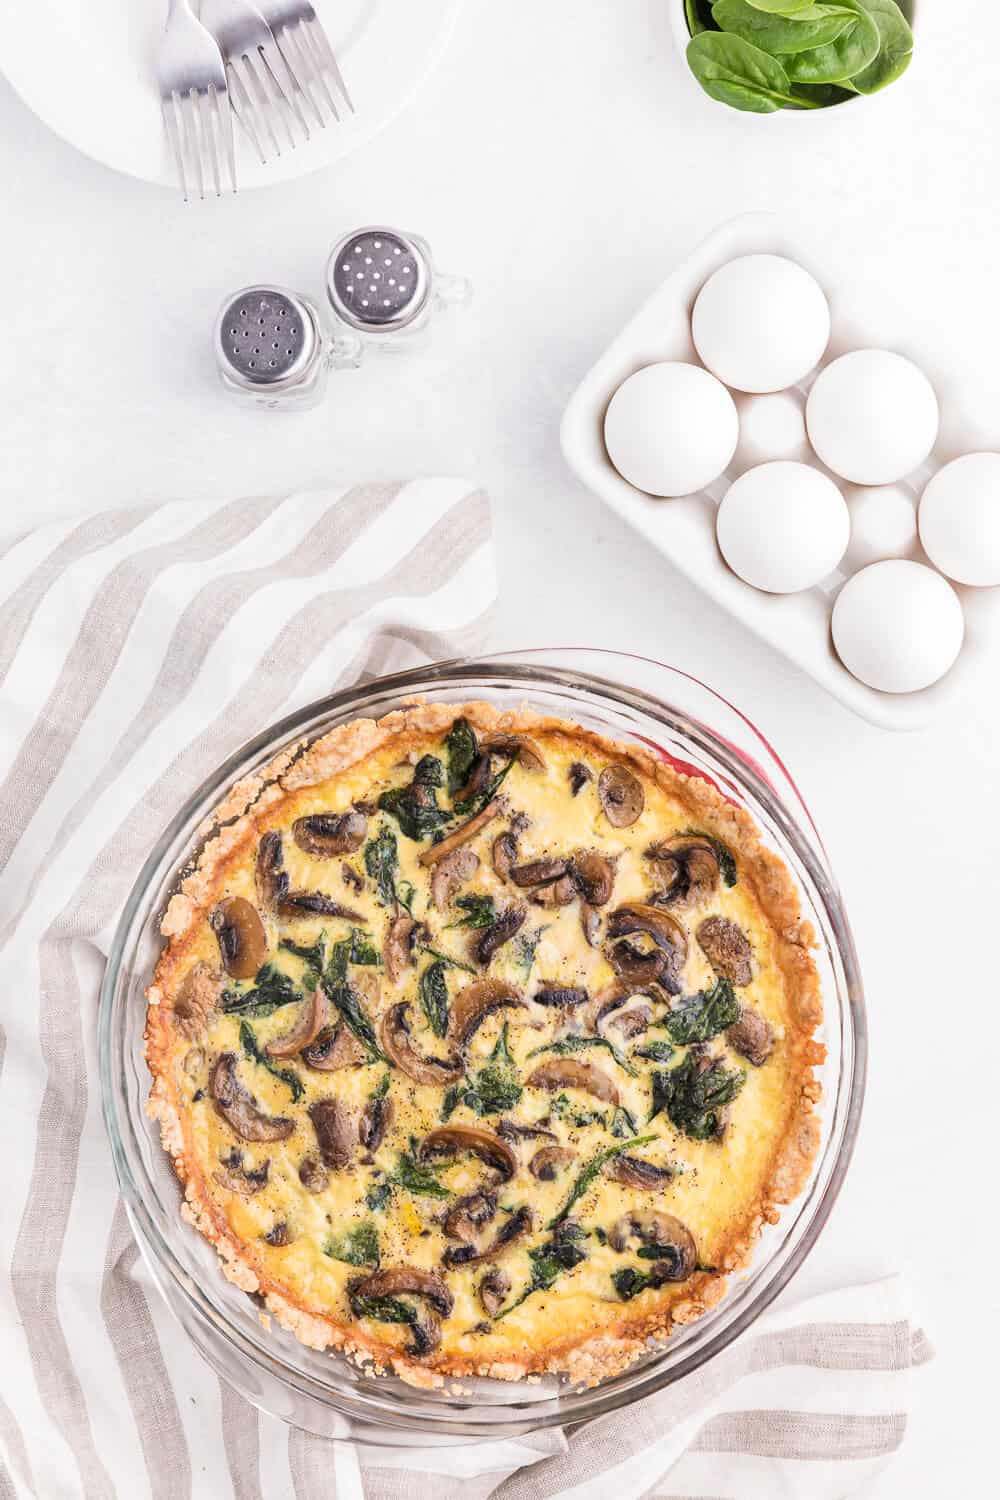 Spinach Mushroom Quiche- Fresh baby spinach, sliced mushrooms nestled in a creamy blend of eggs!